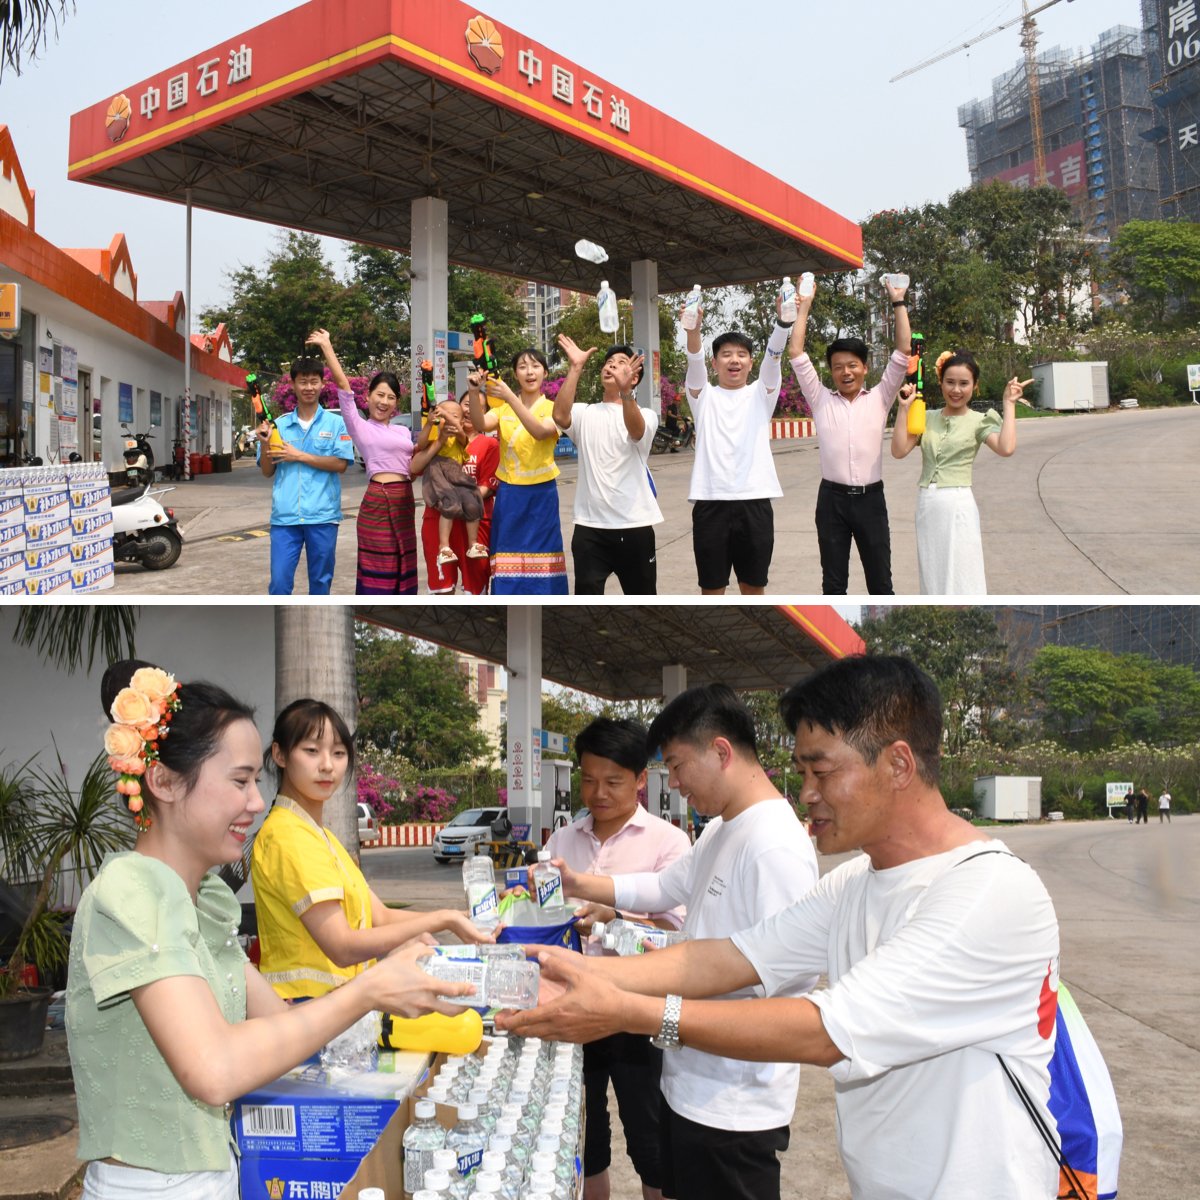 💦Every Apr 15, China's Dai, Achang, Blang, and other ethnic communities mark #WaterSplashingFestival by splashing water to welcome blessings.😆 Our team at PetroChina Yunnan Marketing Company is elevating the spirit through enhancing every aspect of our service.🤗 #CNPCservice